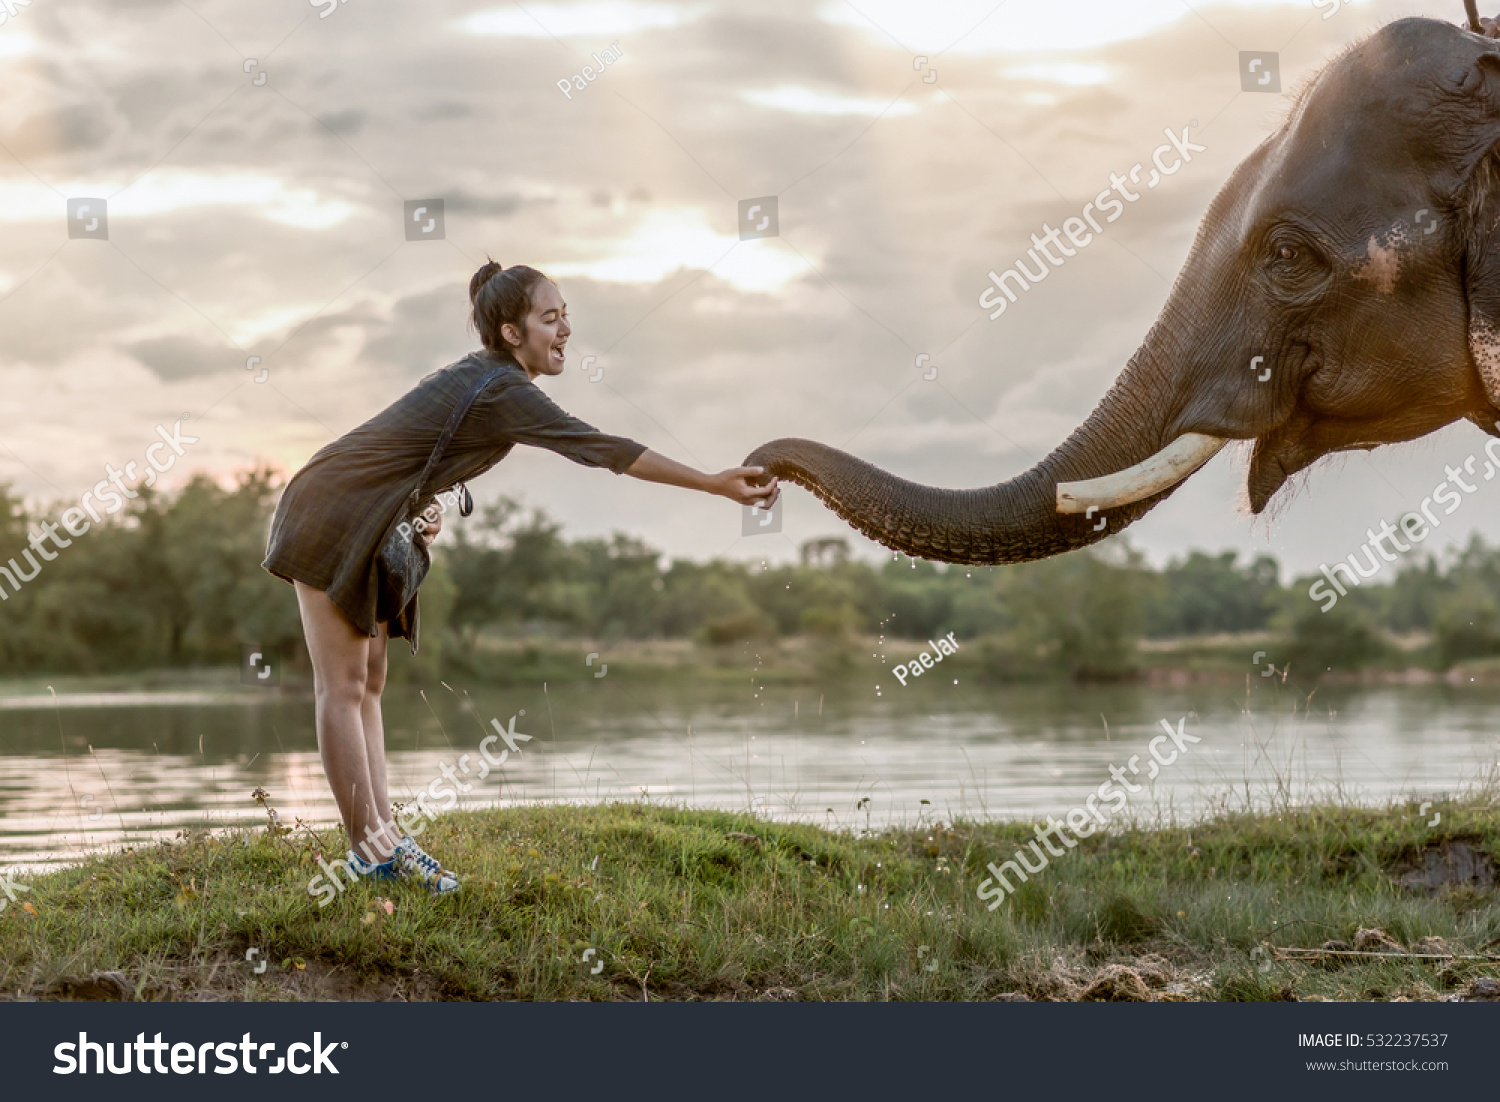 A cure girl softly touching the trunk of the elephant . Showing the lovely moment between human and elephant. #532237537